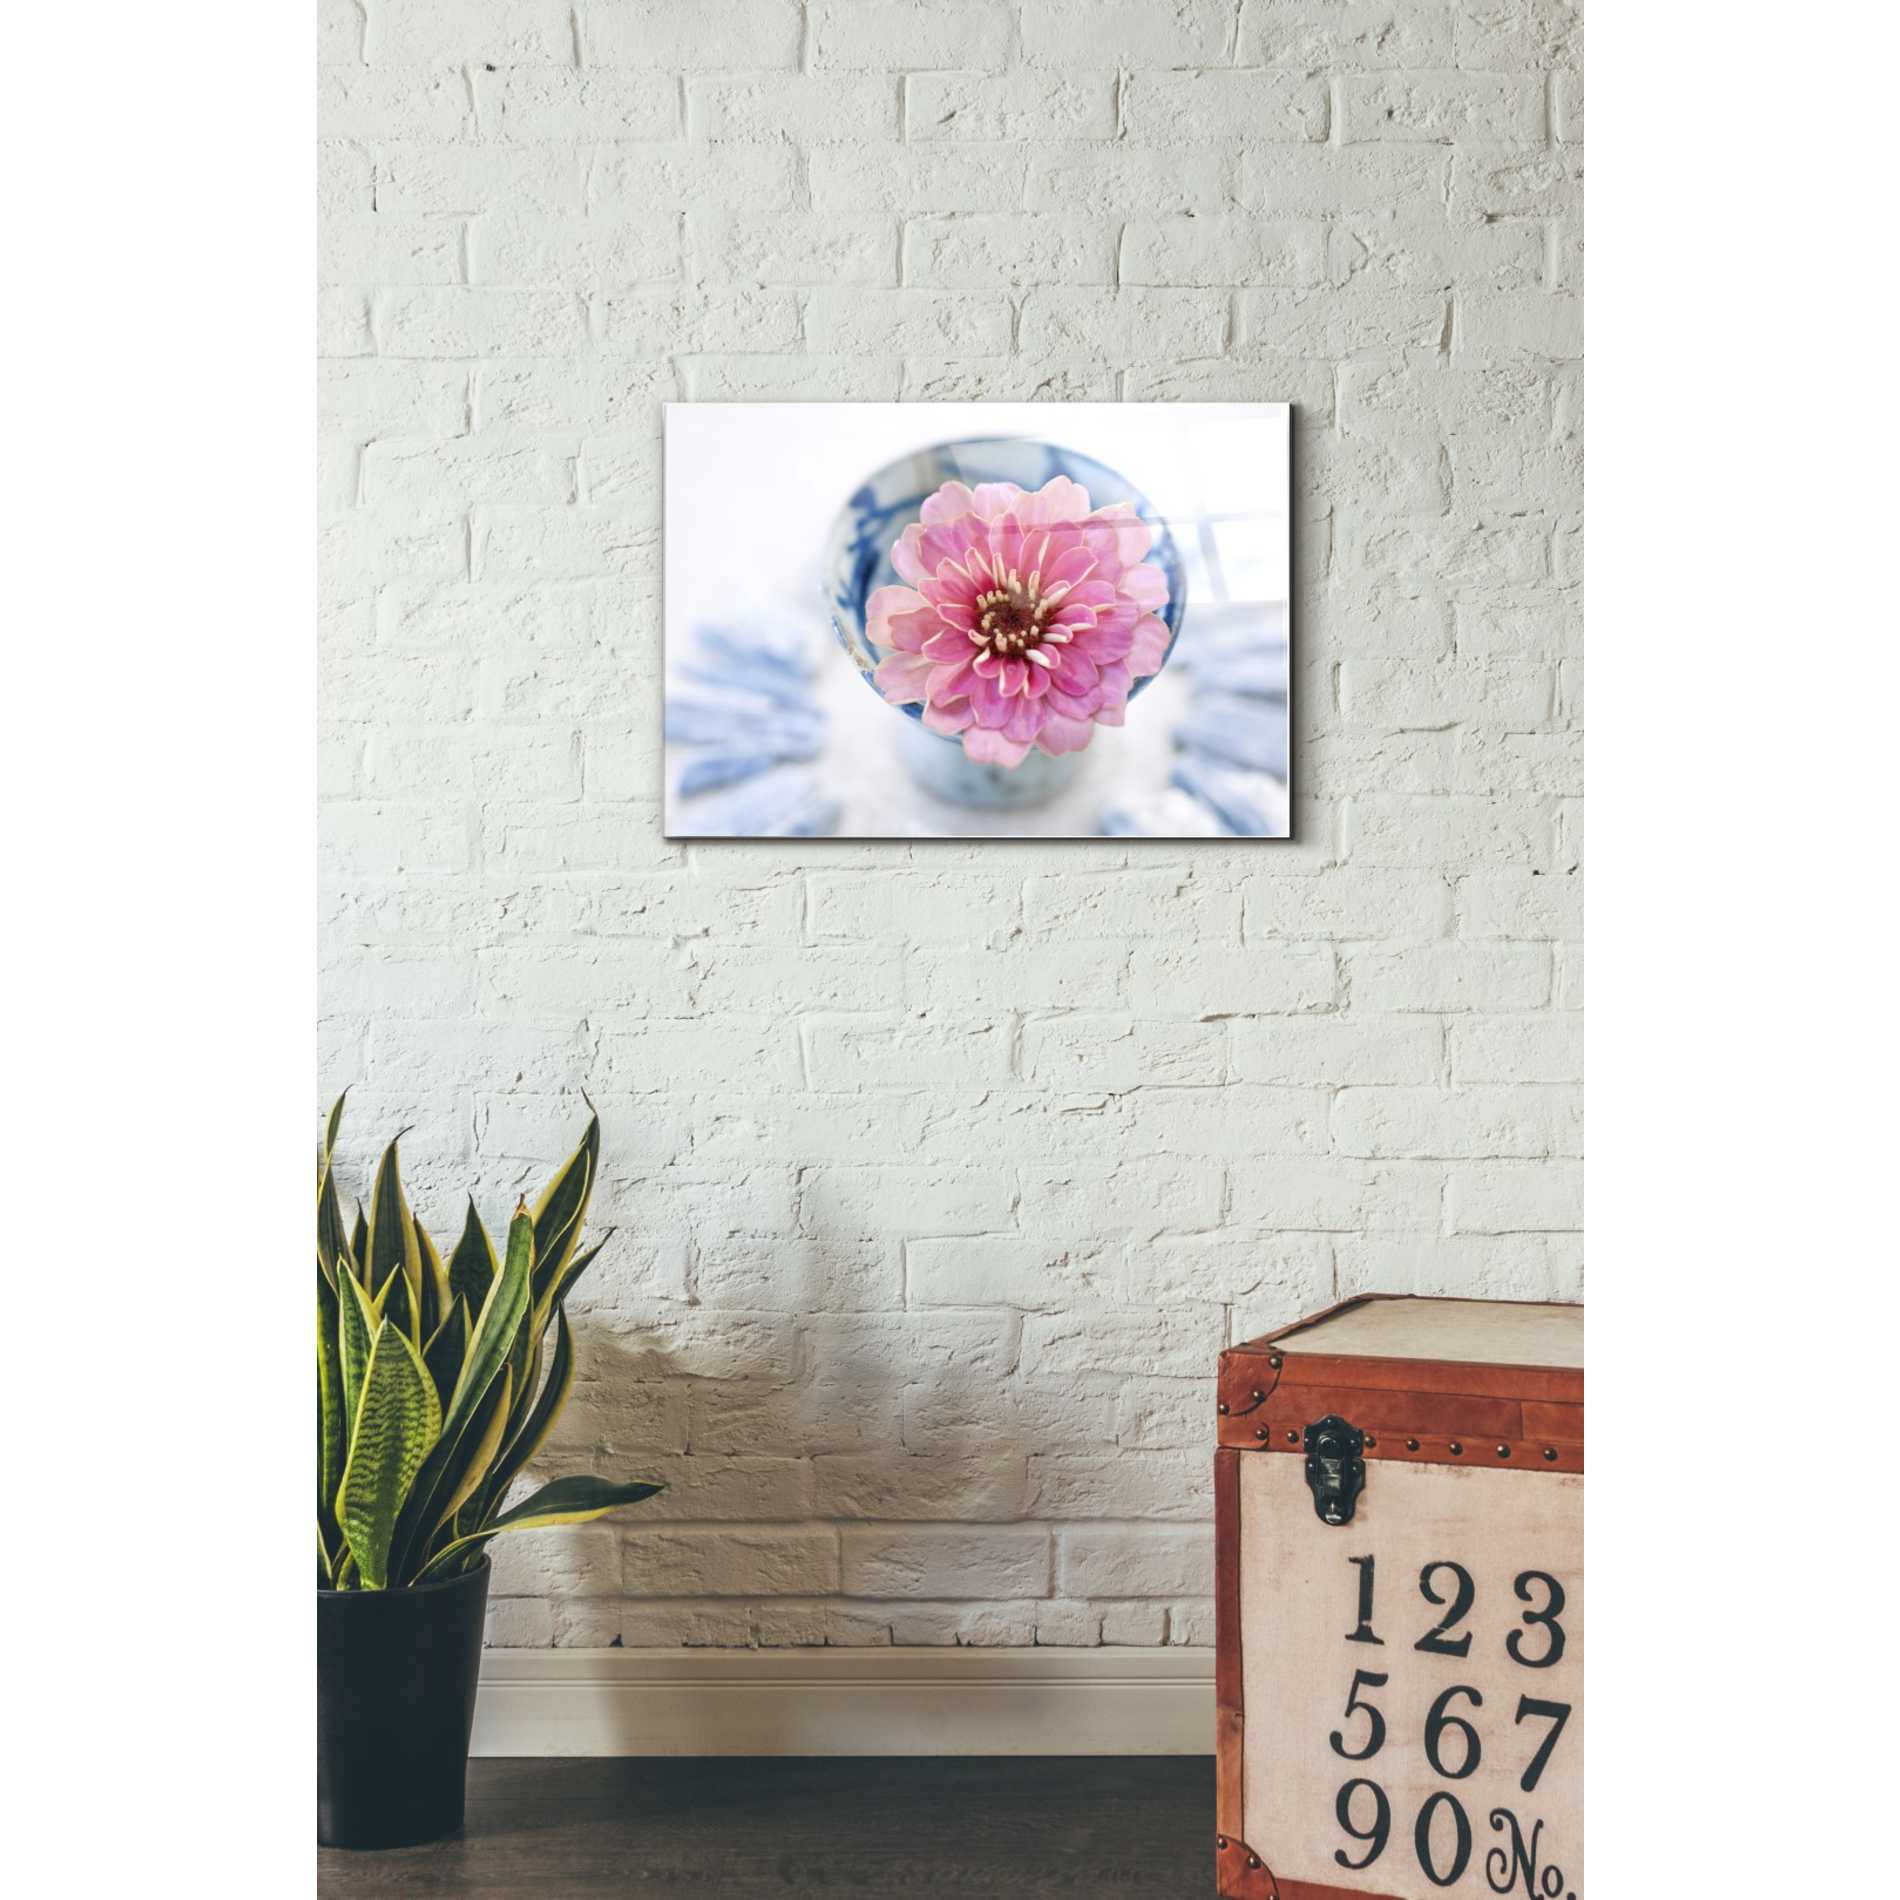 Epic Art 'Pink Flower in a Saké Cup' by Elena Ray Acrylic Glass Wall Art,16x24